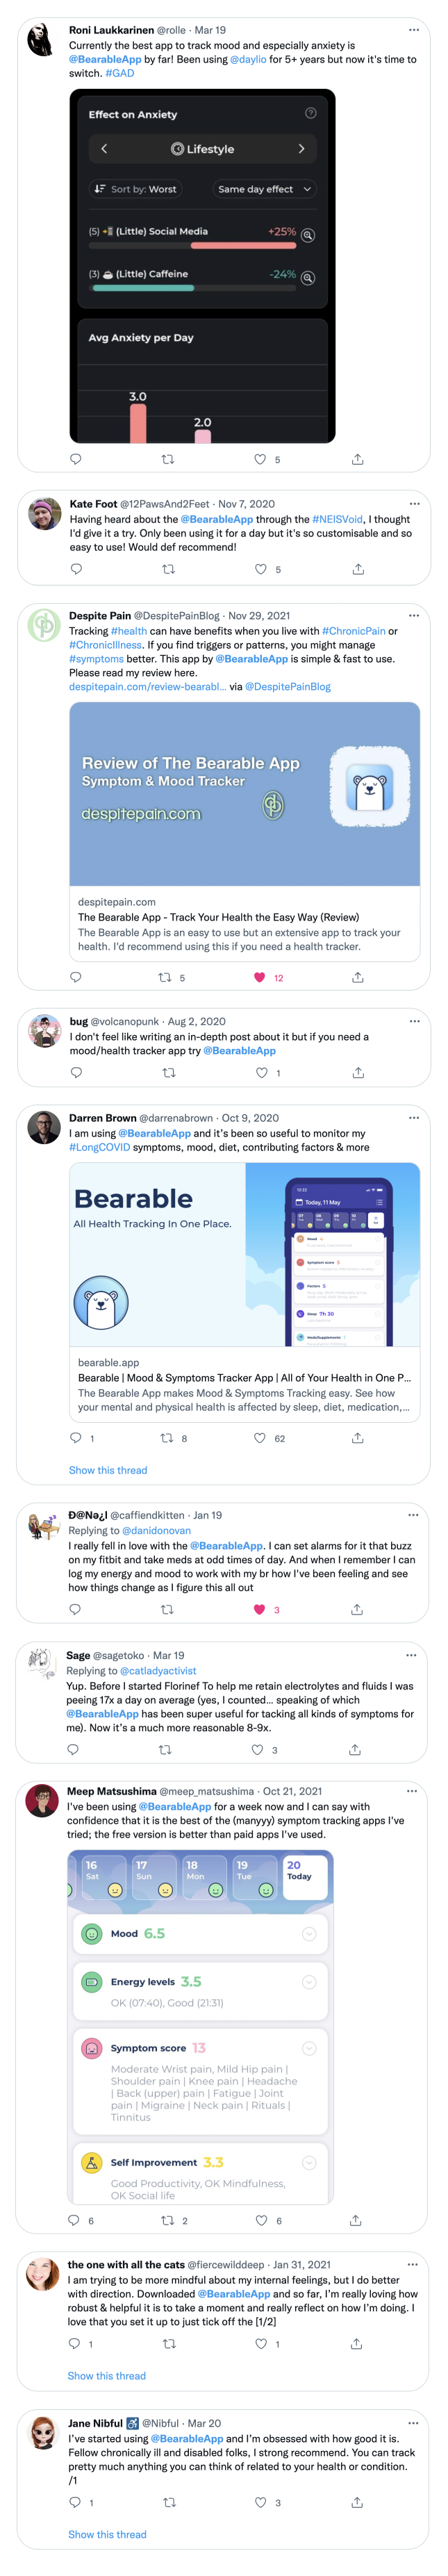 Tweets about Bearable